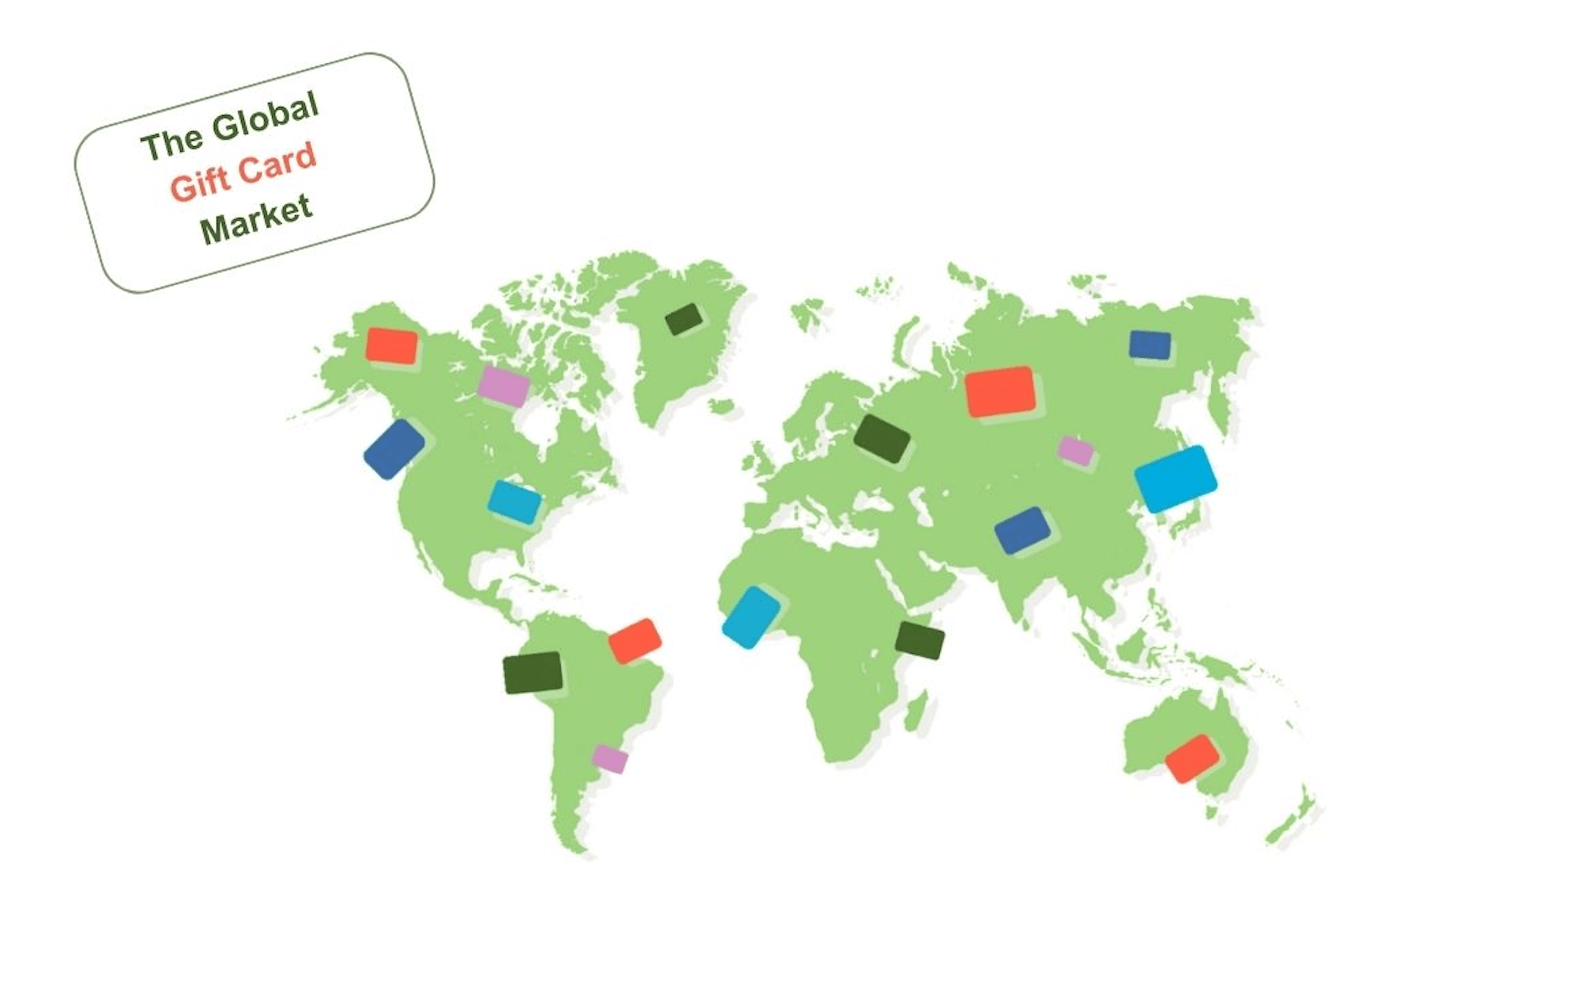 The global gift card market 